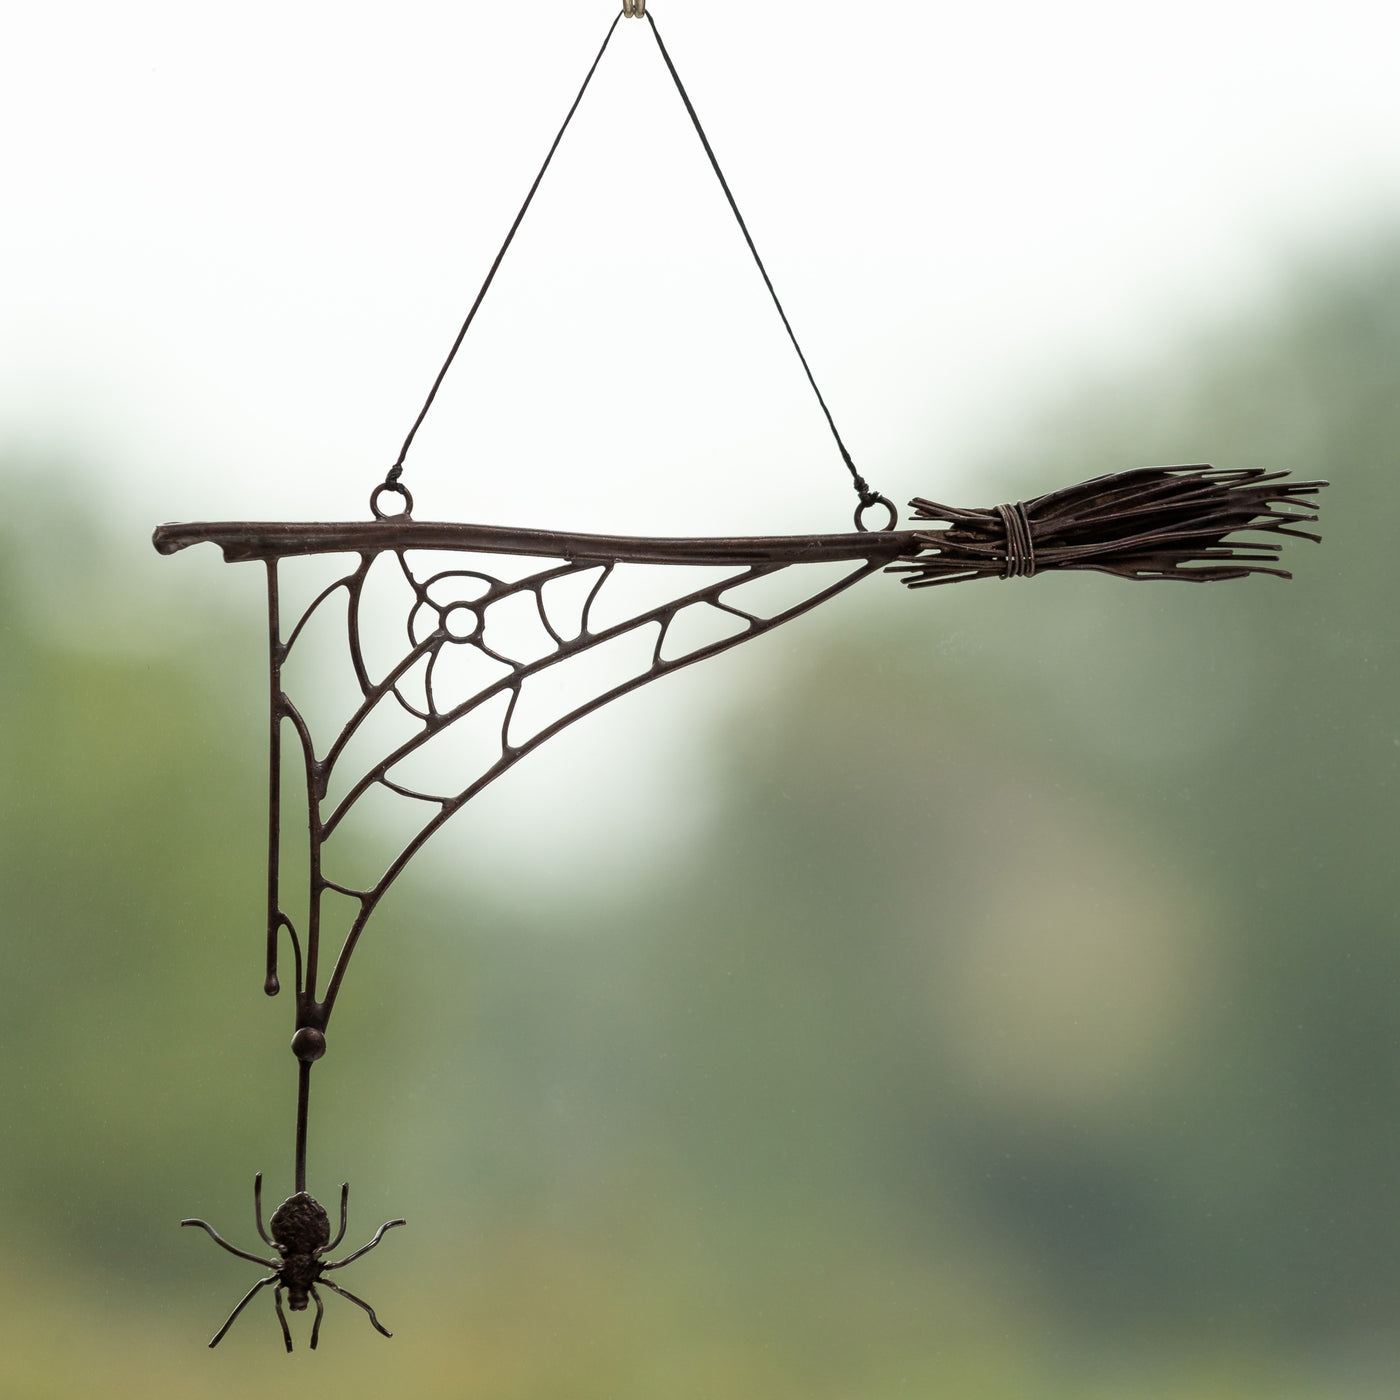 Spider web with a broom for Halloween celebrations